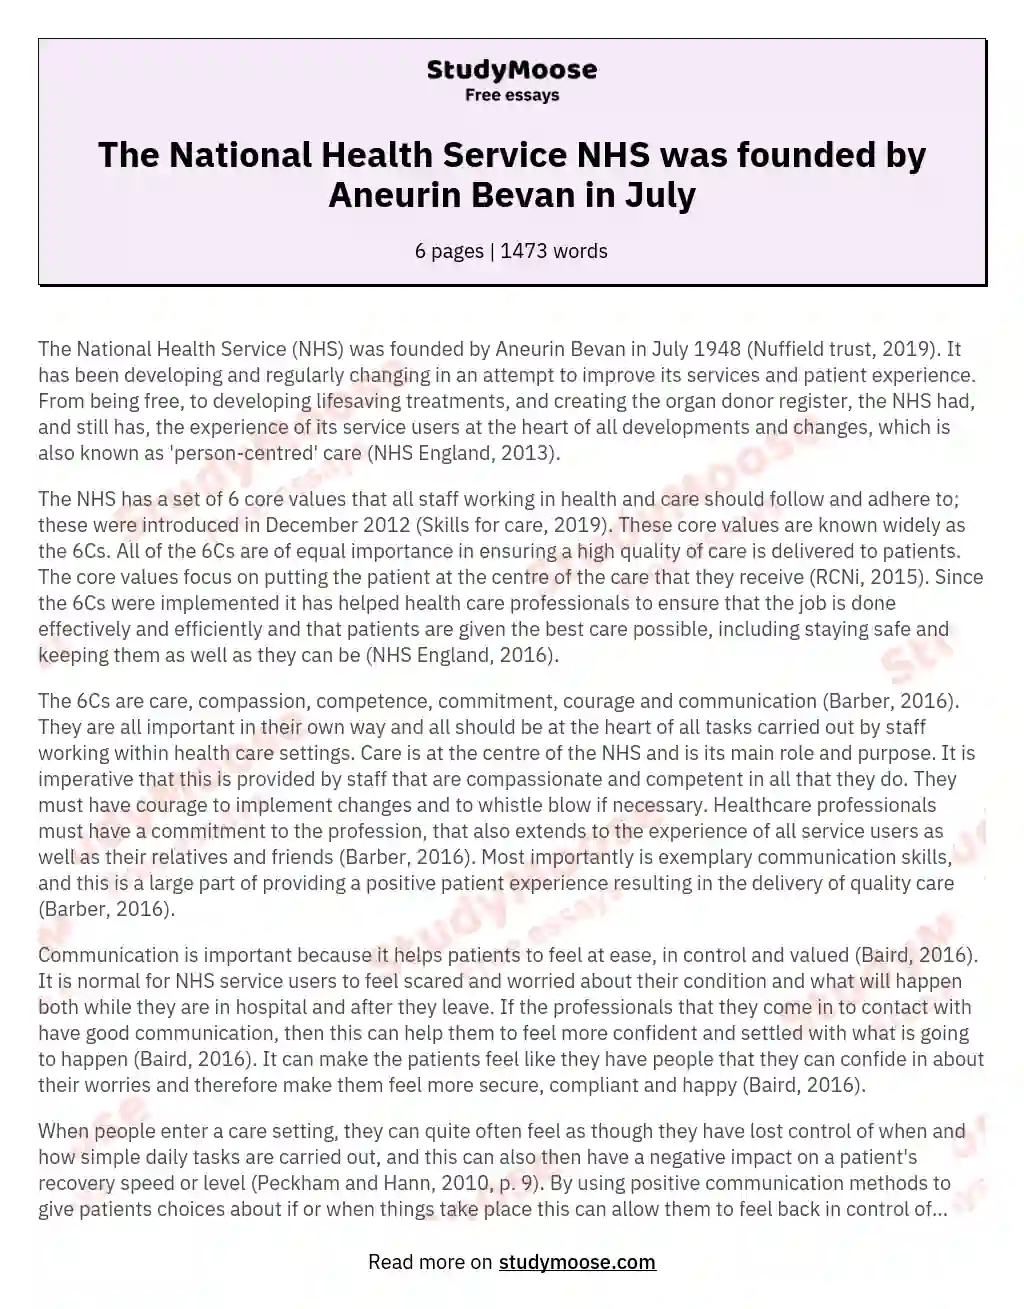 The National Health Service NHS was founded by Aneurin Bevan in July